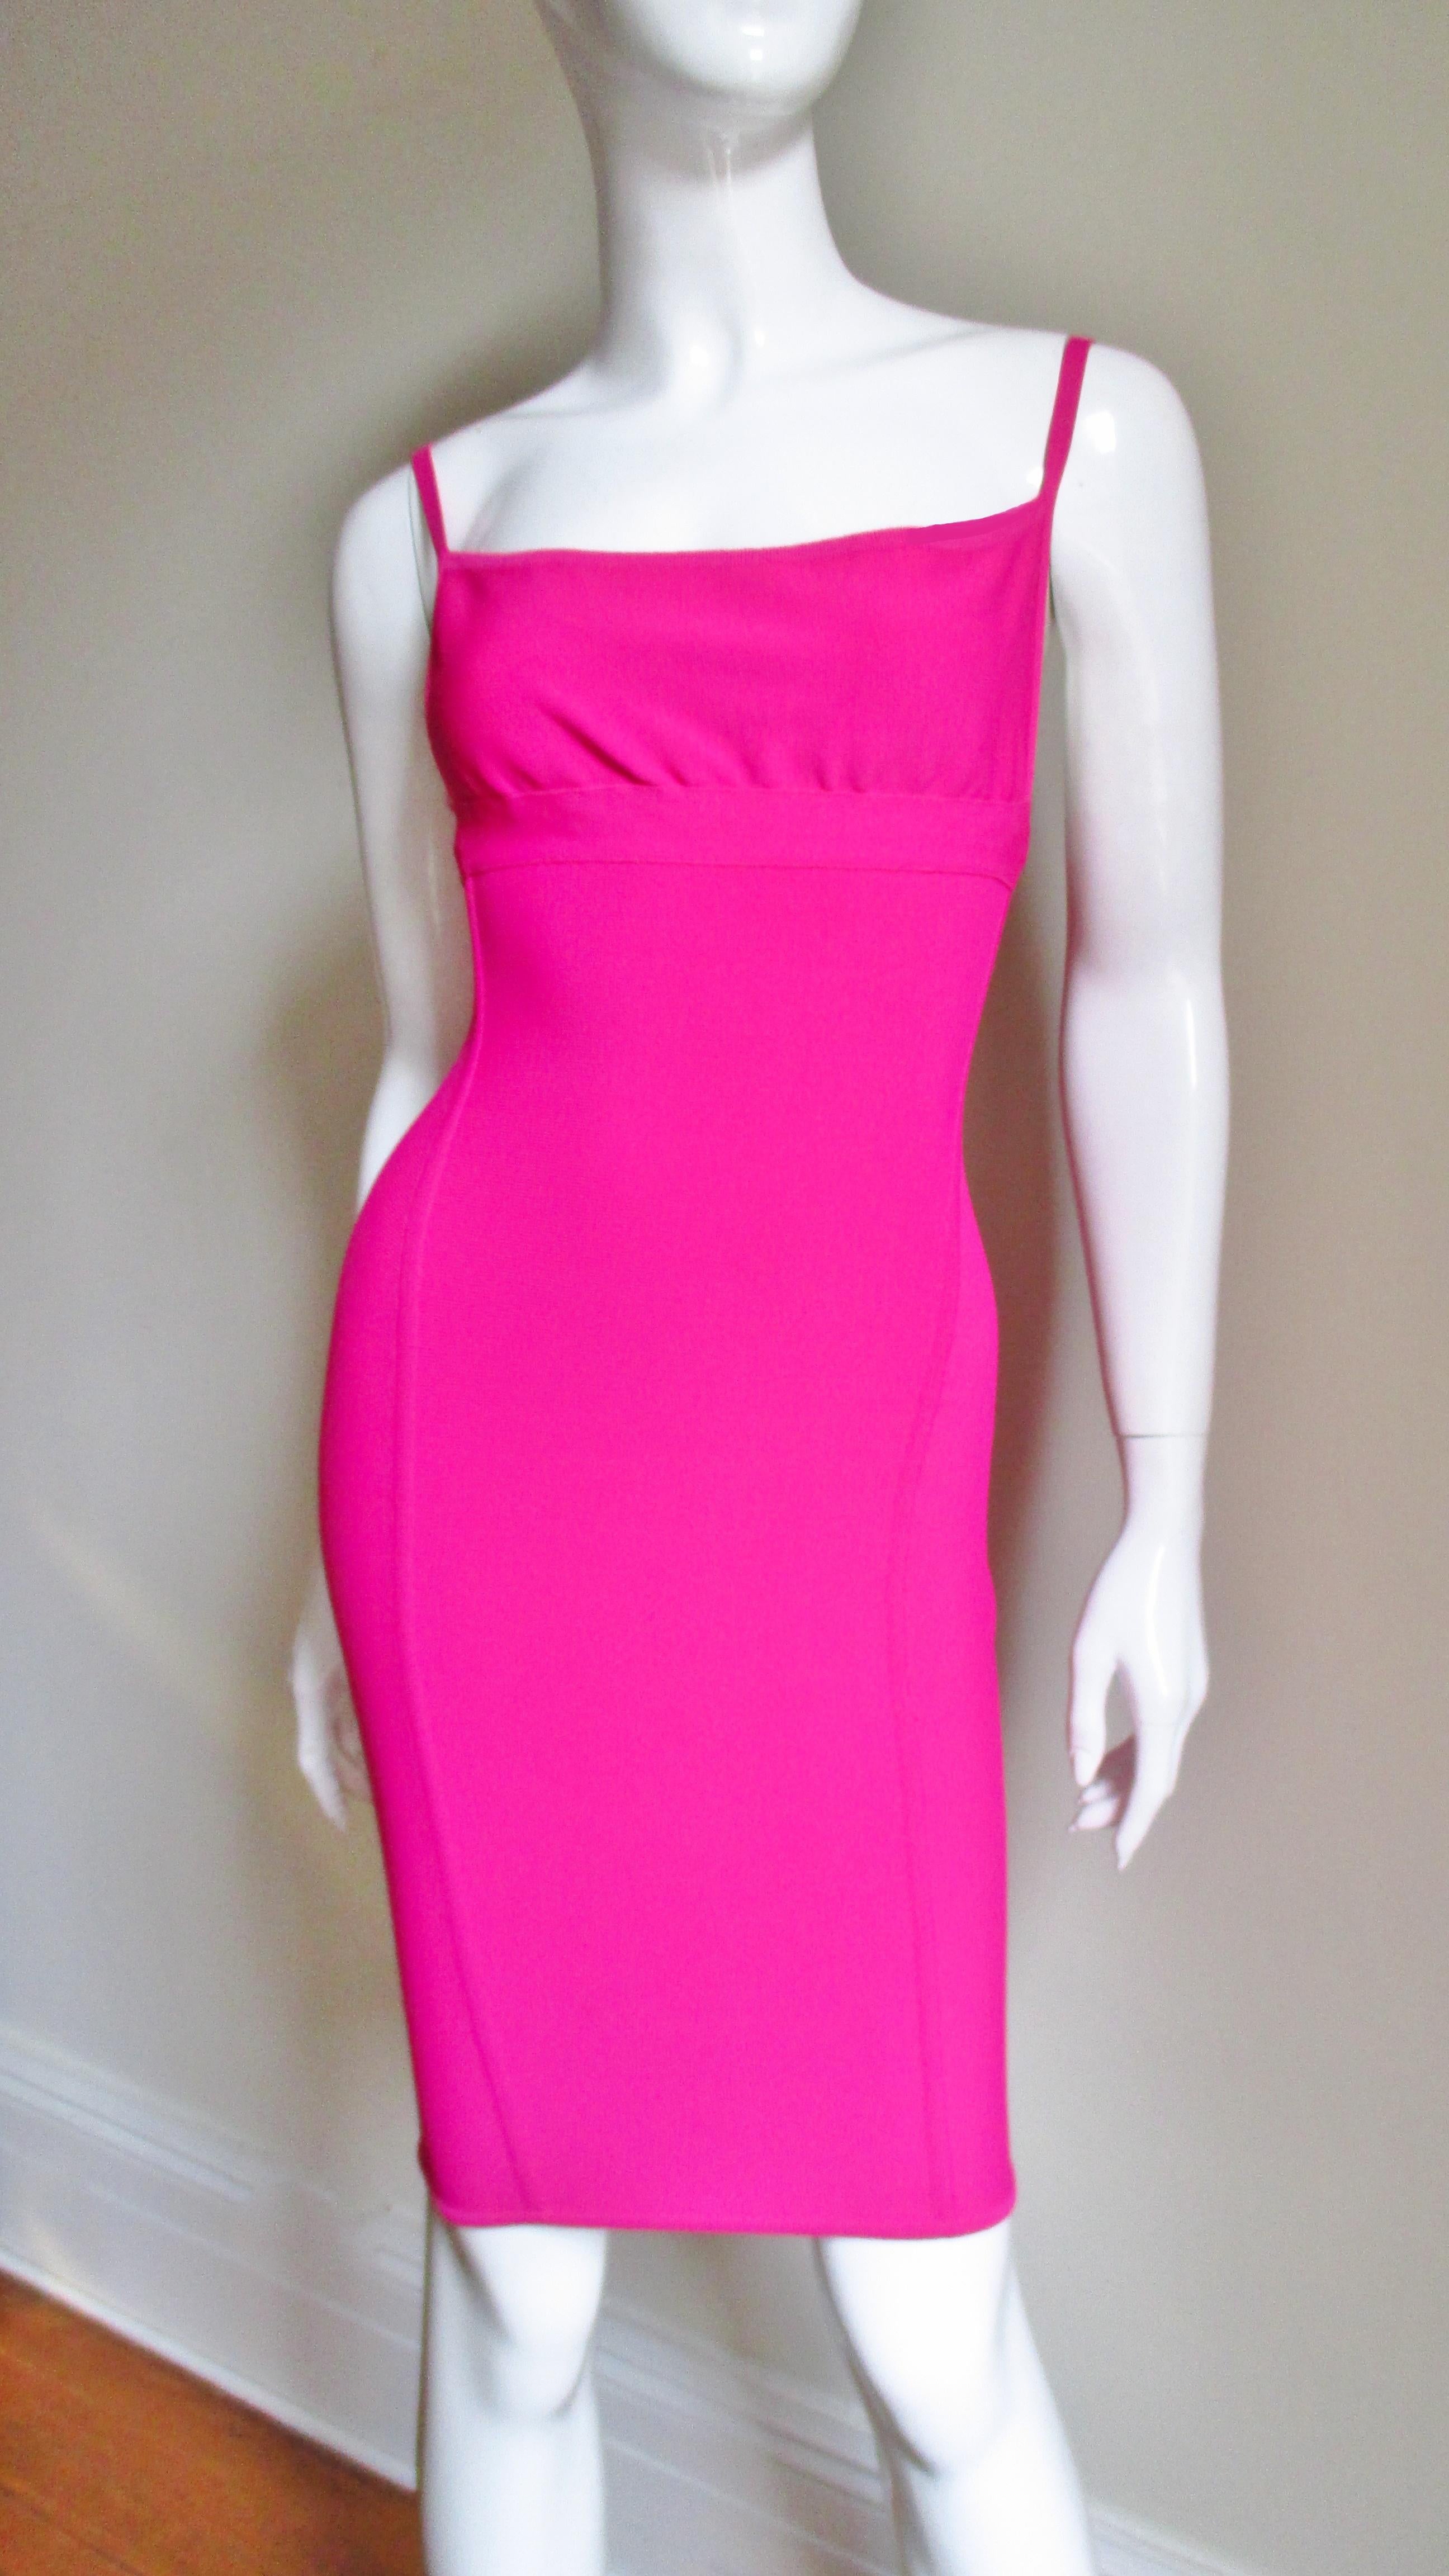 A  gorgeous dress from the master Herve Leger in a fabulous hot pink stretch bandage fabric.  It has the body conscious fit that he was famous for including multiple seaming which enhances shape. It has spaghetti straps, a seam under the bust line